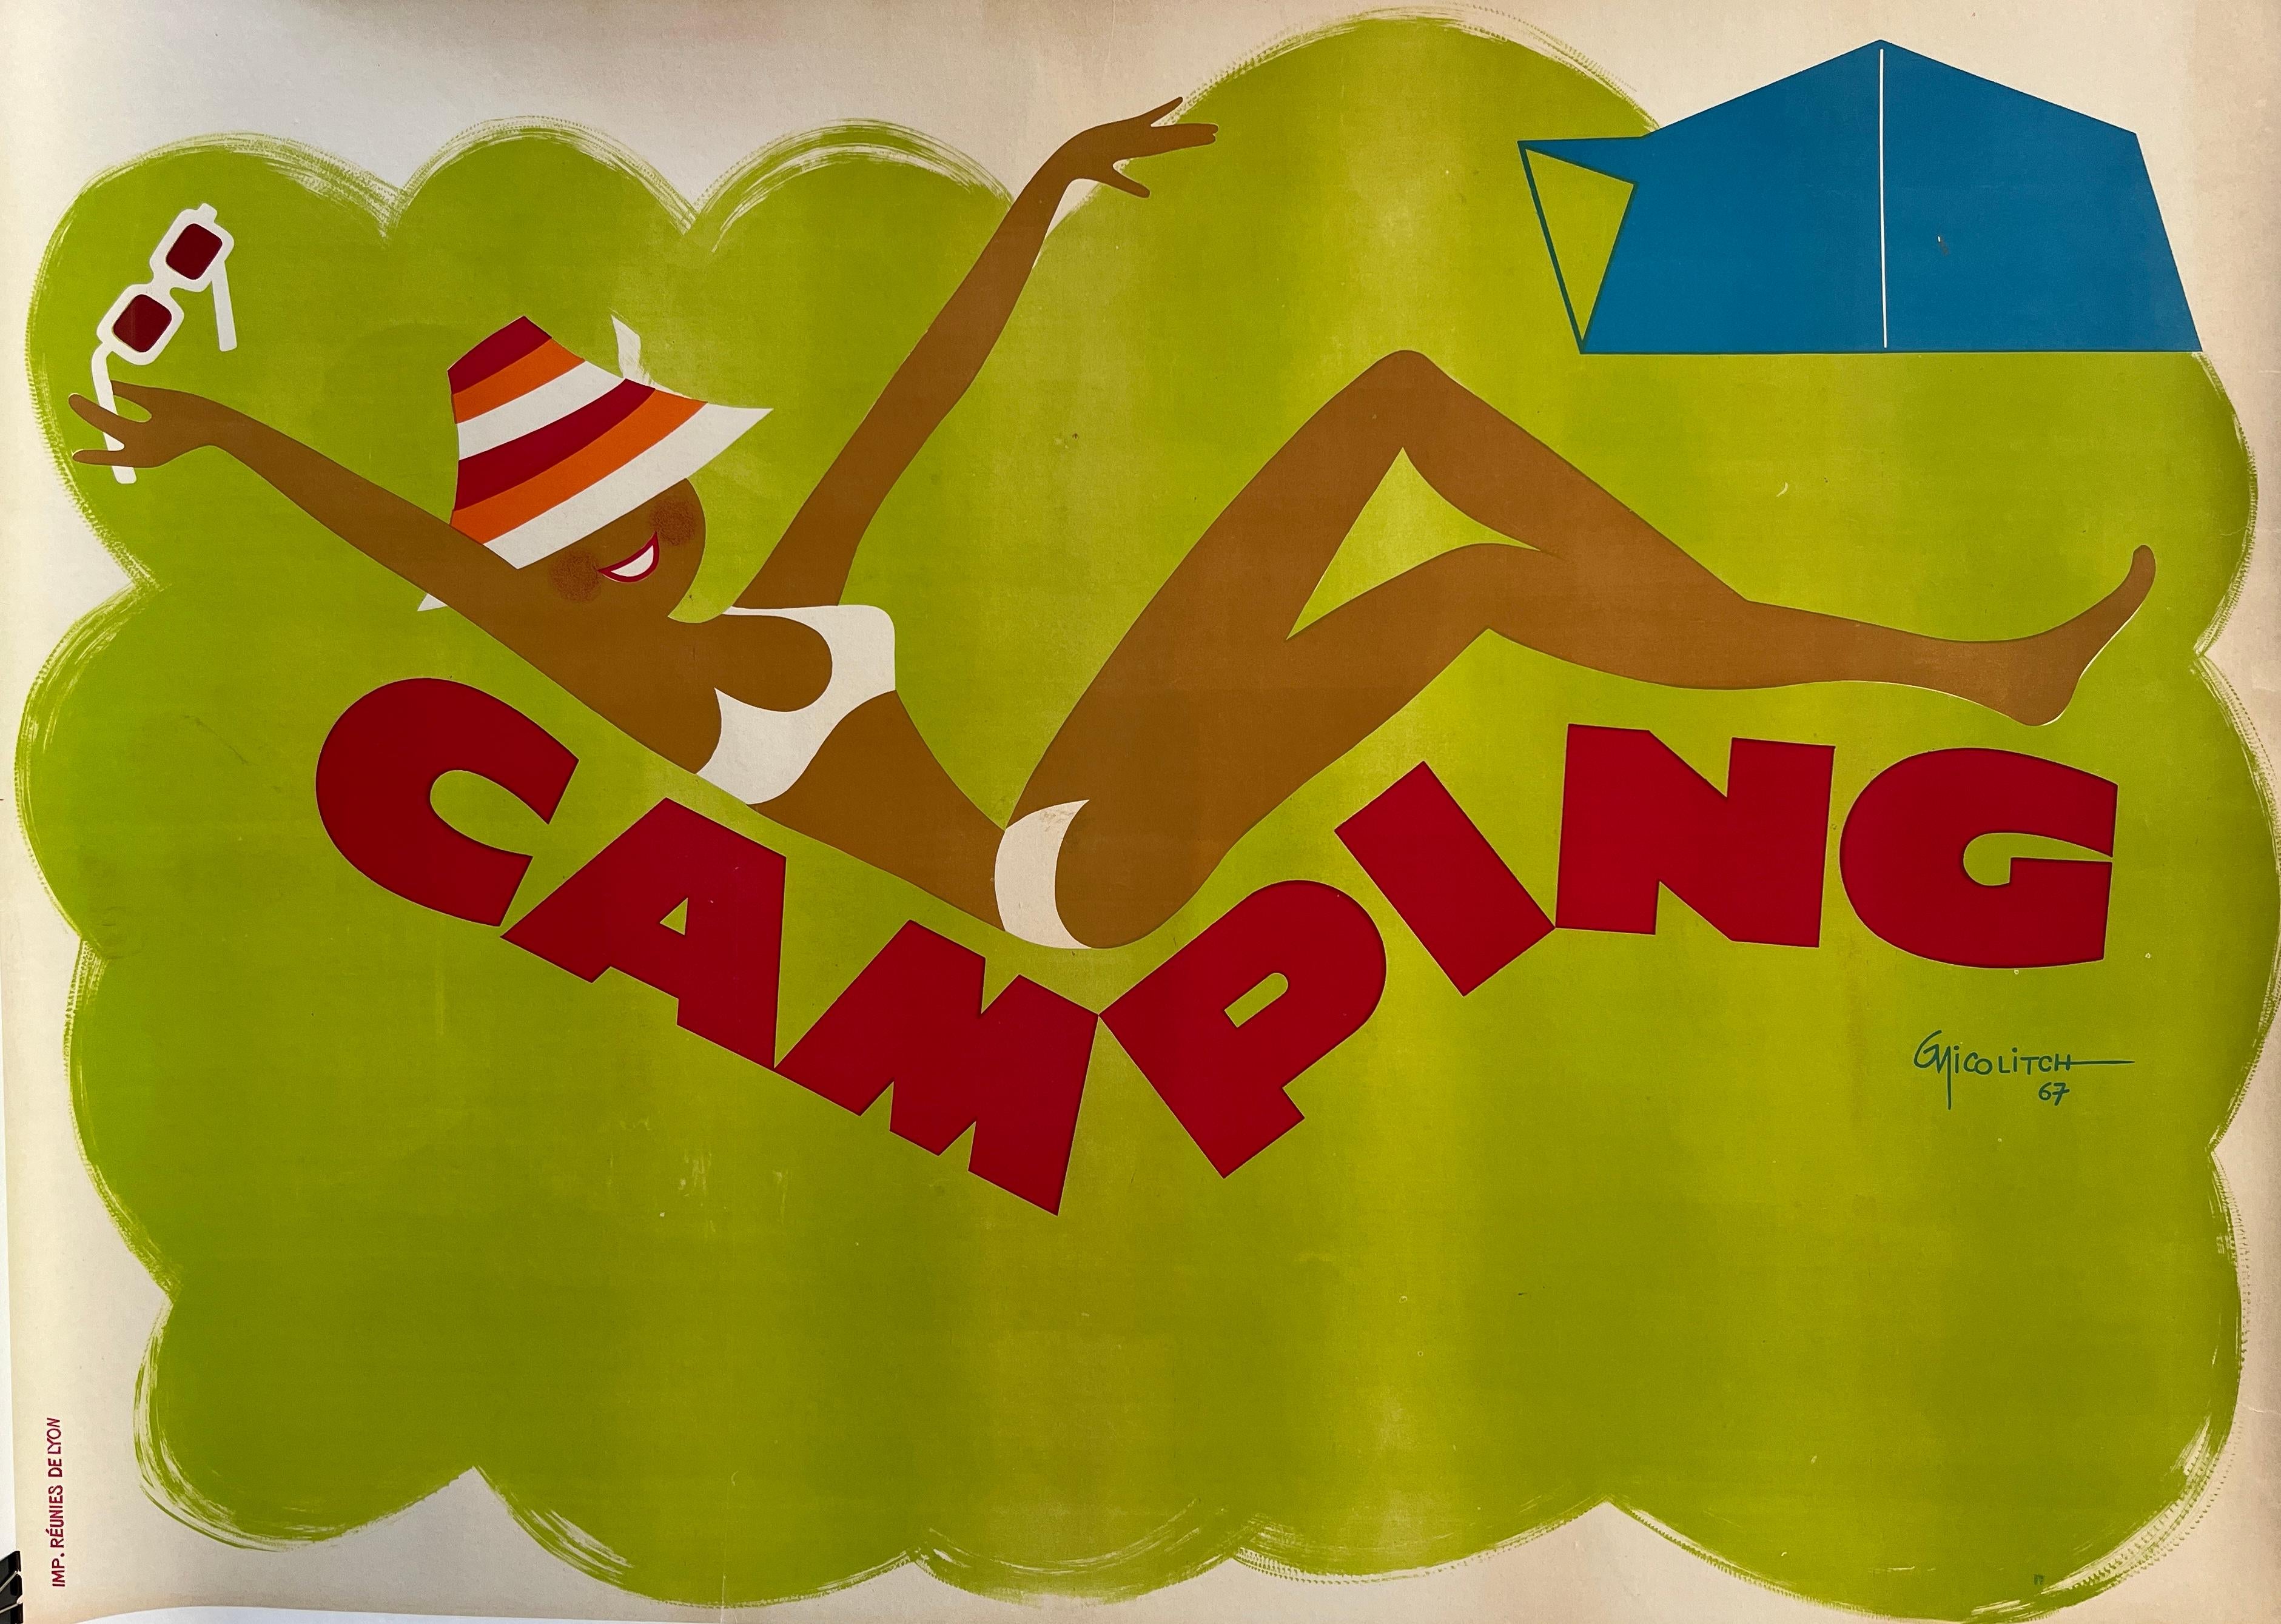 Original Vintage French 1960's Poster, 'Camping' by G. Nicolitch In Good Condition For Sale In Melbourne, Victoria